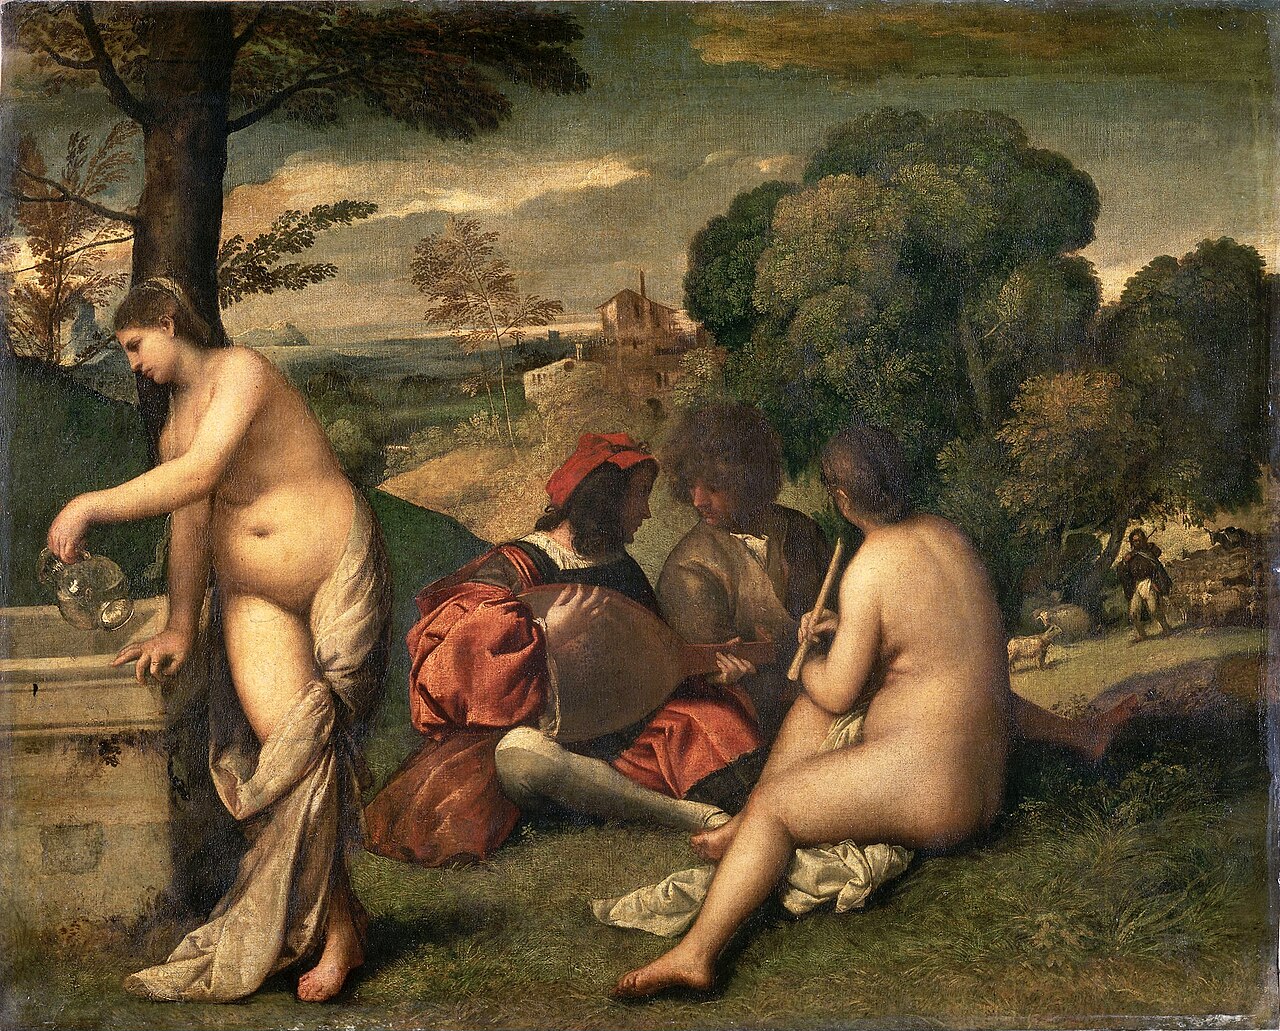 Two nude women stand and sit in the foreground as two men in dress of the period converse while sitting in a landscape